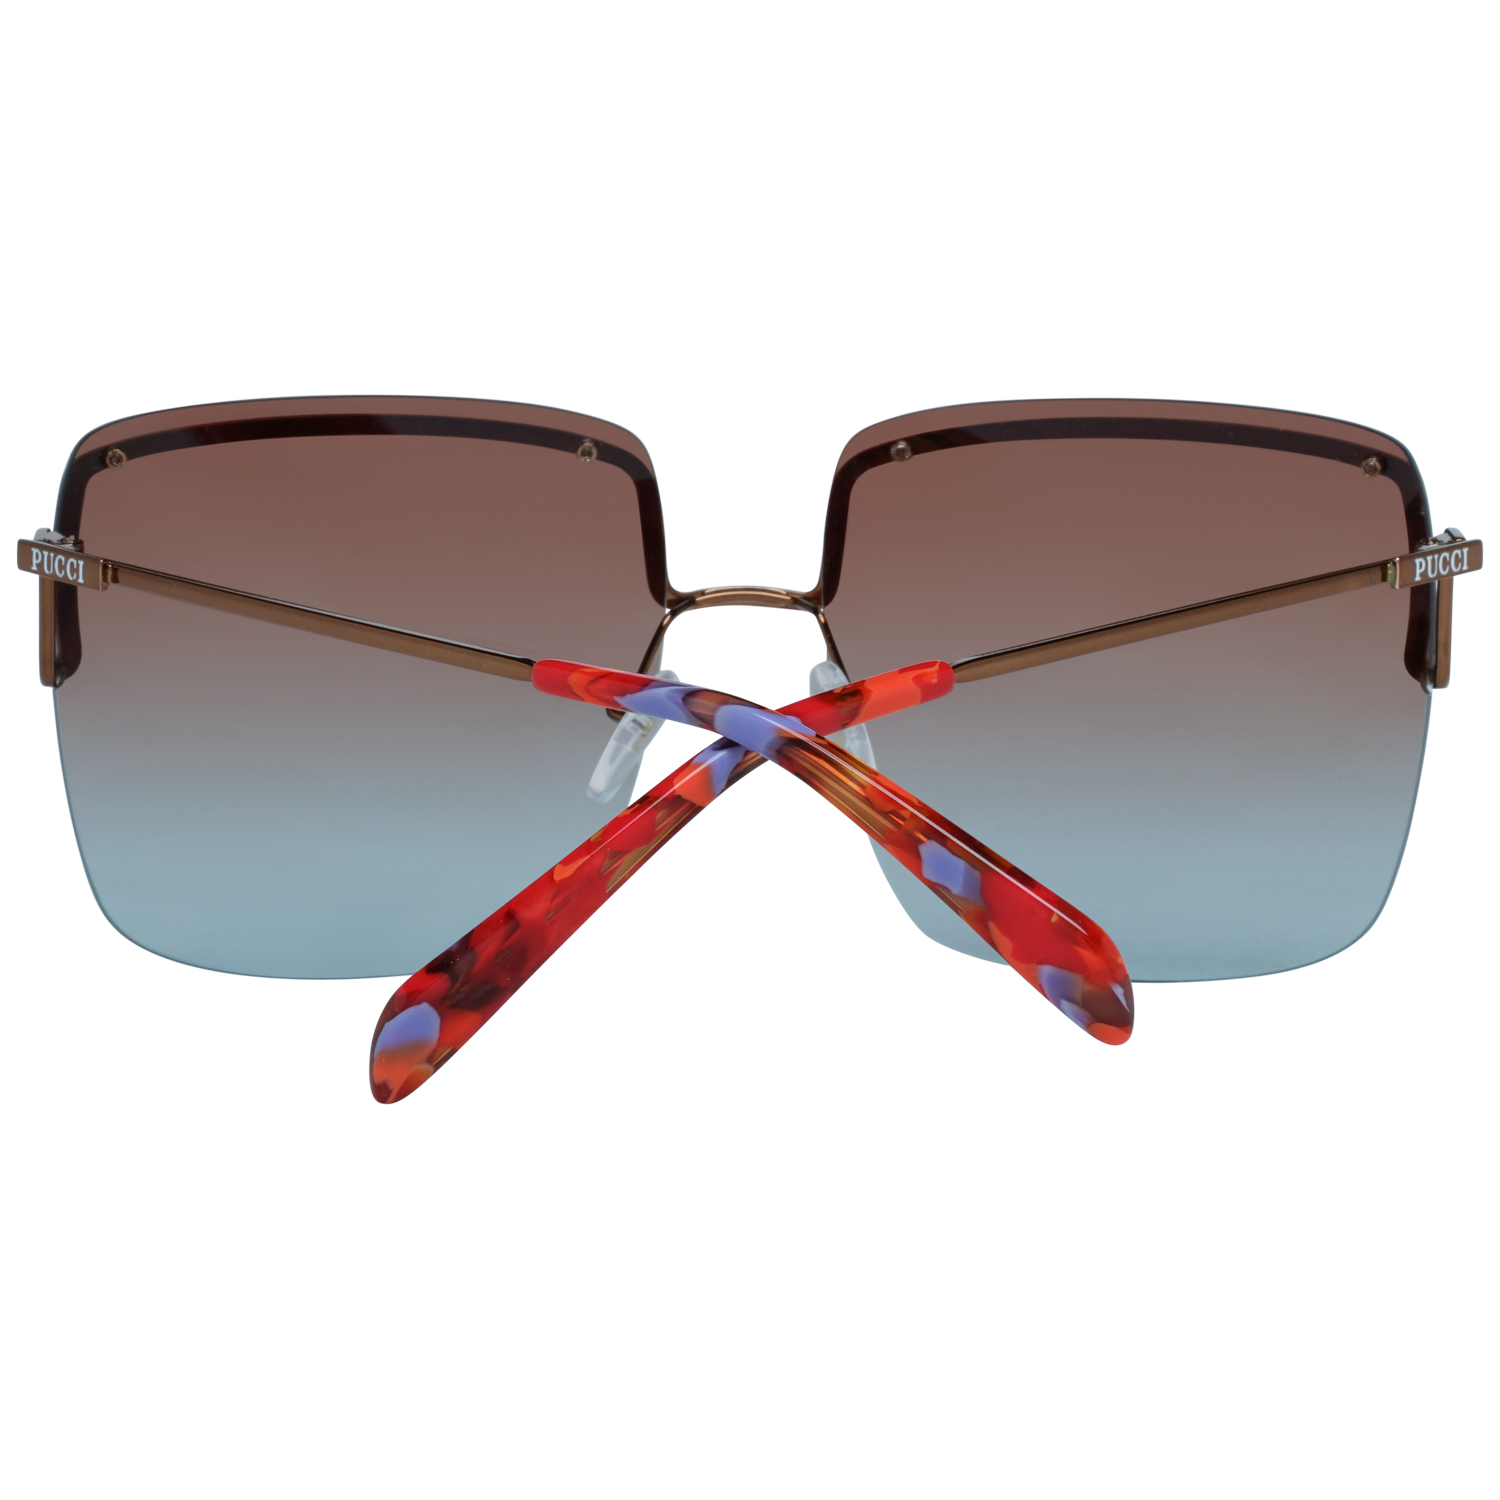 Emilio Pucci Sunglasses EP0116 36F 62 Women
Frame color: Bronze
Lenses color: Multicolor
Lenses material: Plastic
Filter category: 2
Style: Square
Lenses effect: Gradient
Protection: 100% UVA & UVB
Size: 62-16-135
Lenses width: 62
Lenses height: 60
Bridge width: 16
Frame width: 138
Temples length: 135
Shipment includes: Case, cleaning cloth
Spring hinge: No